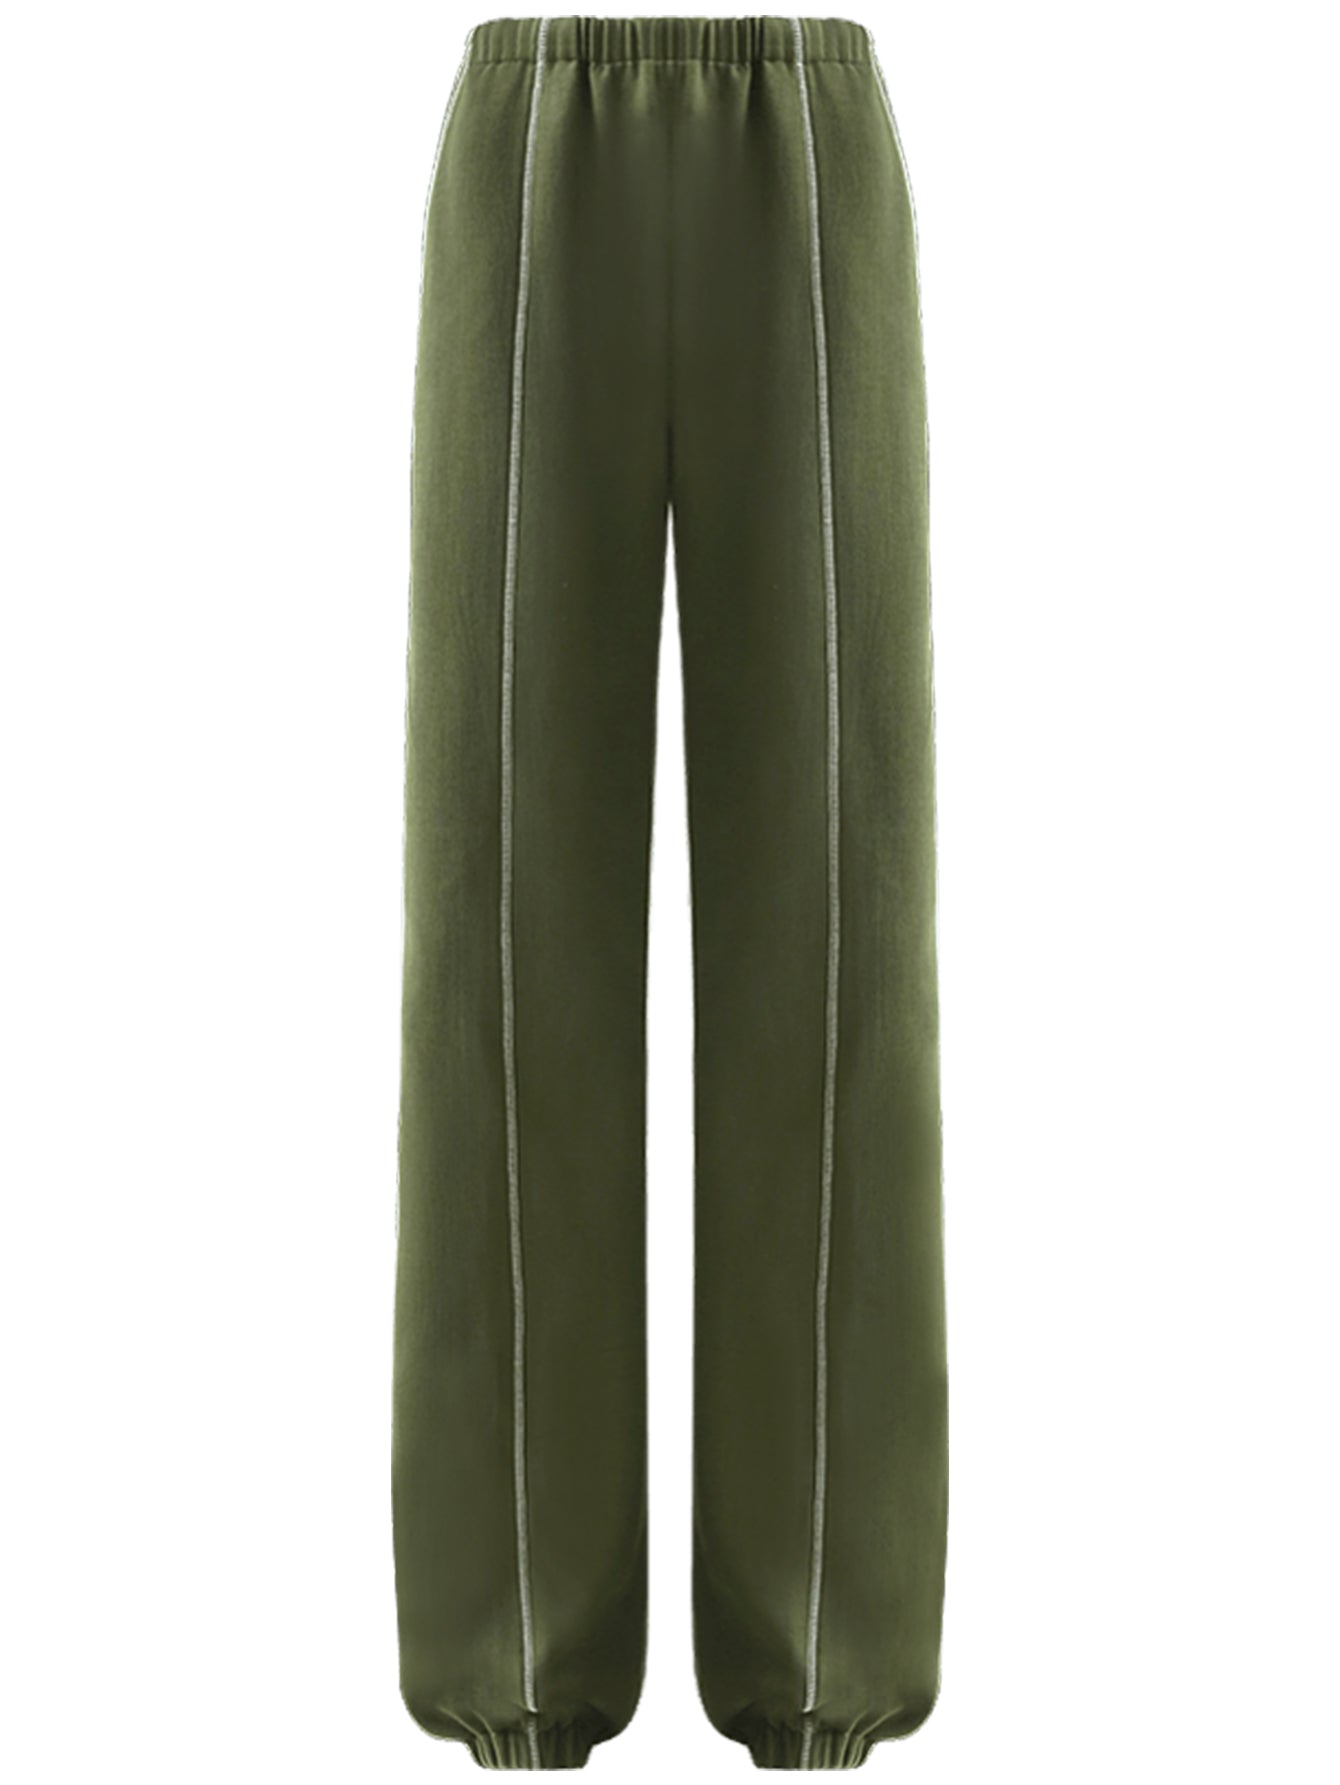 airy-green-sweater-pants-with-contrast-piping-details_all_green_5.jpg